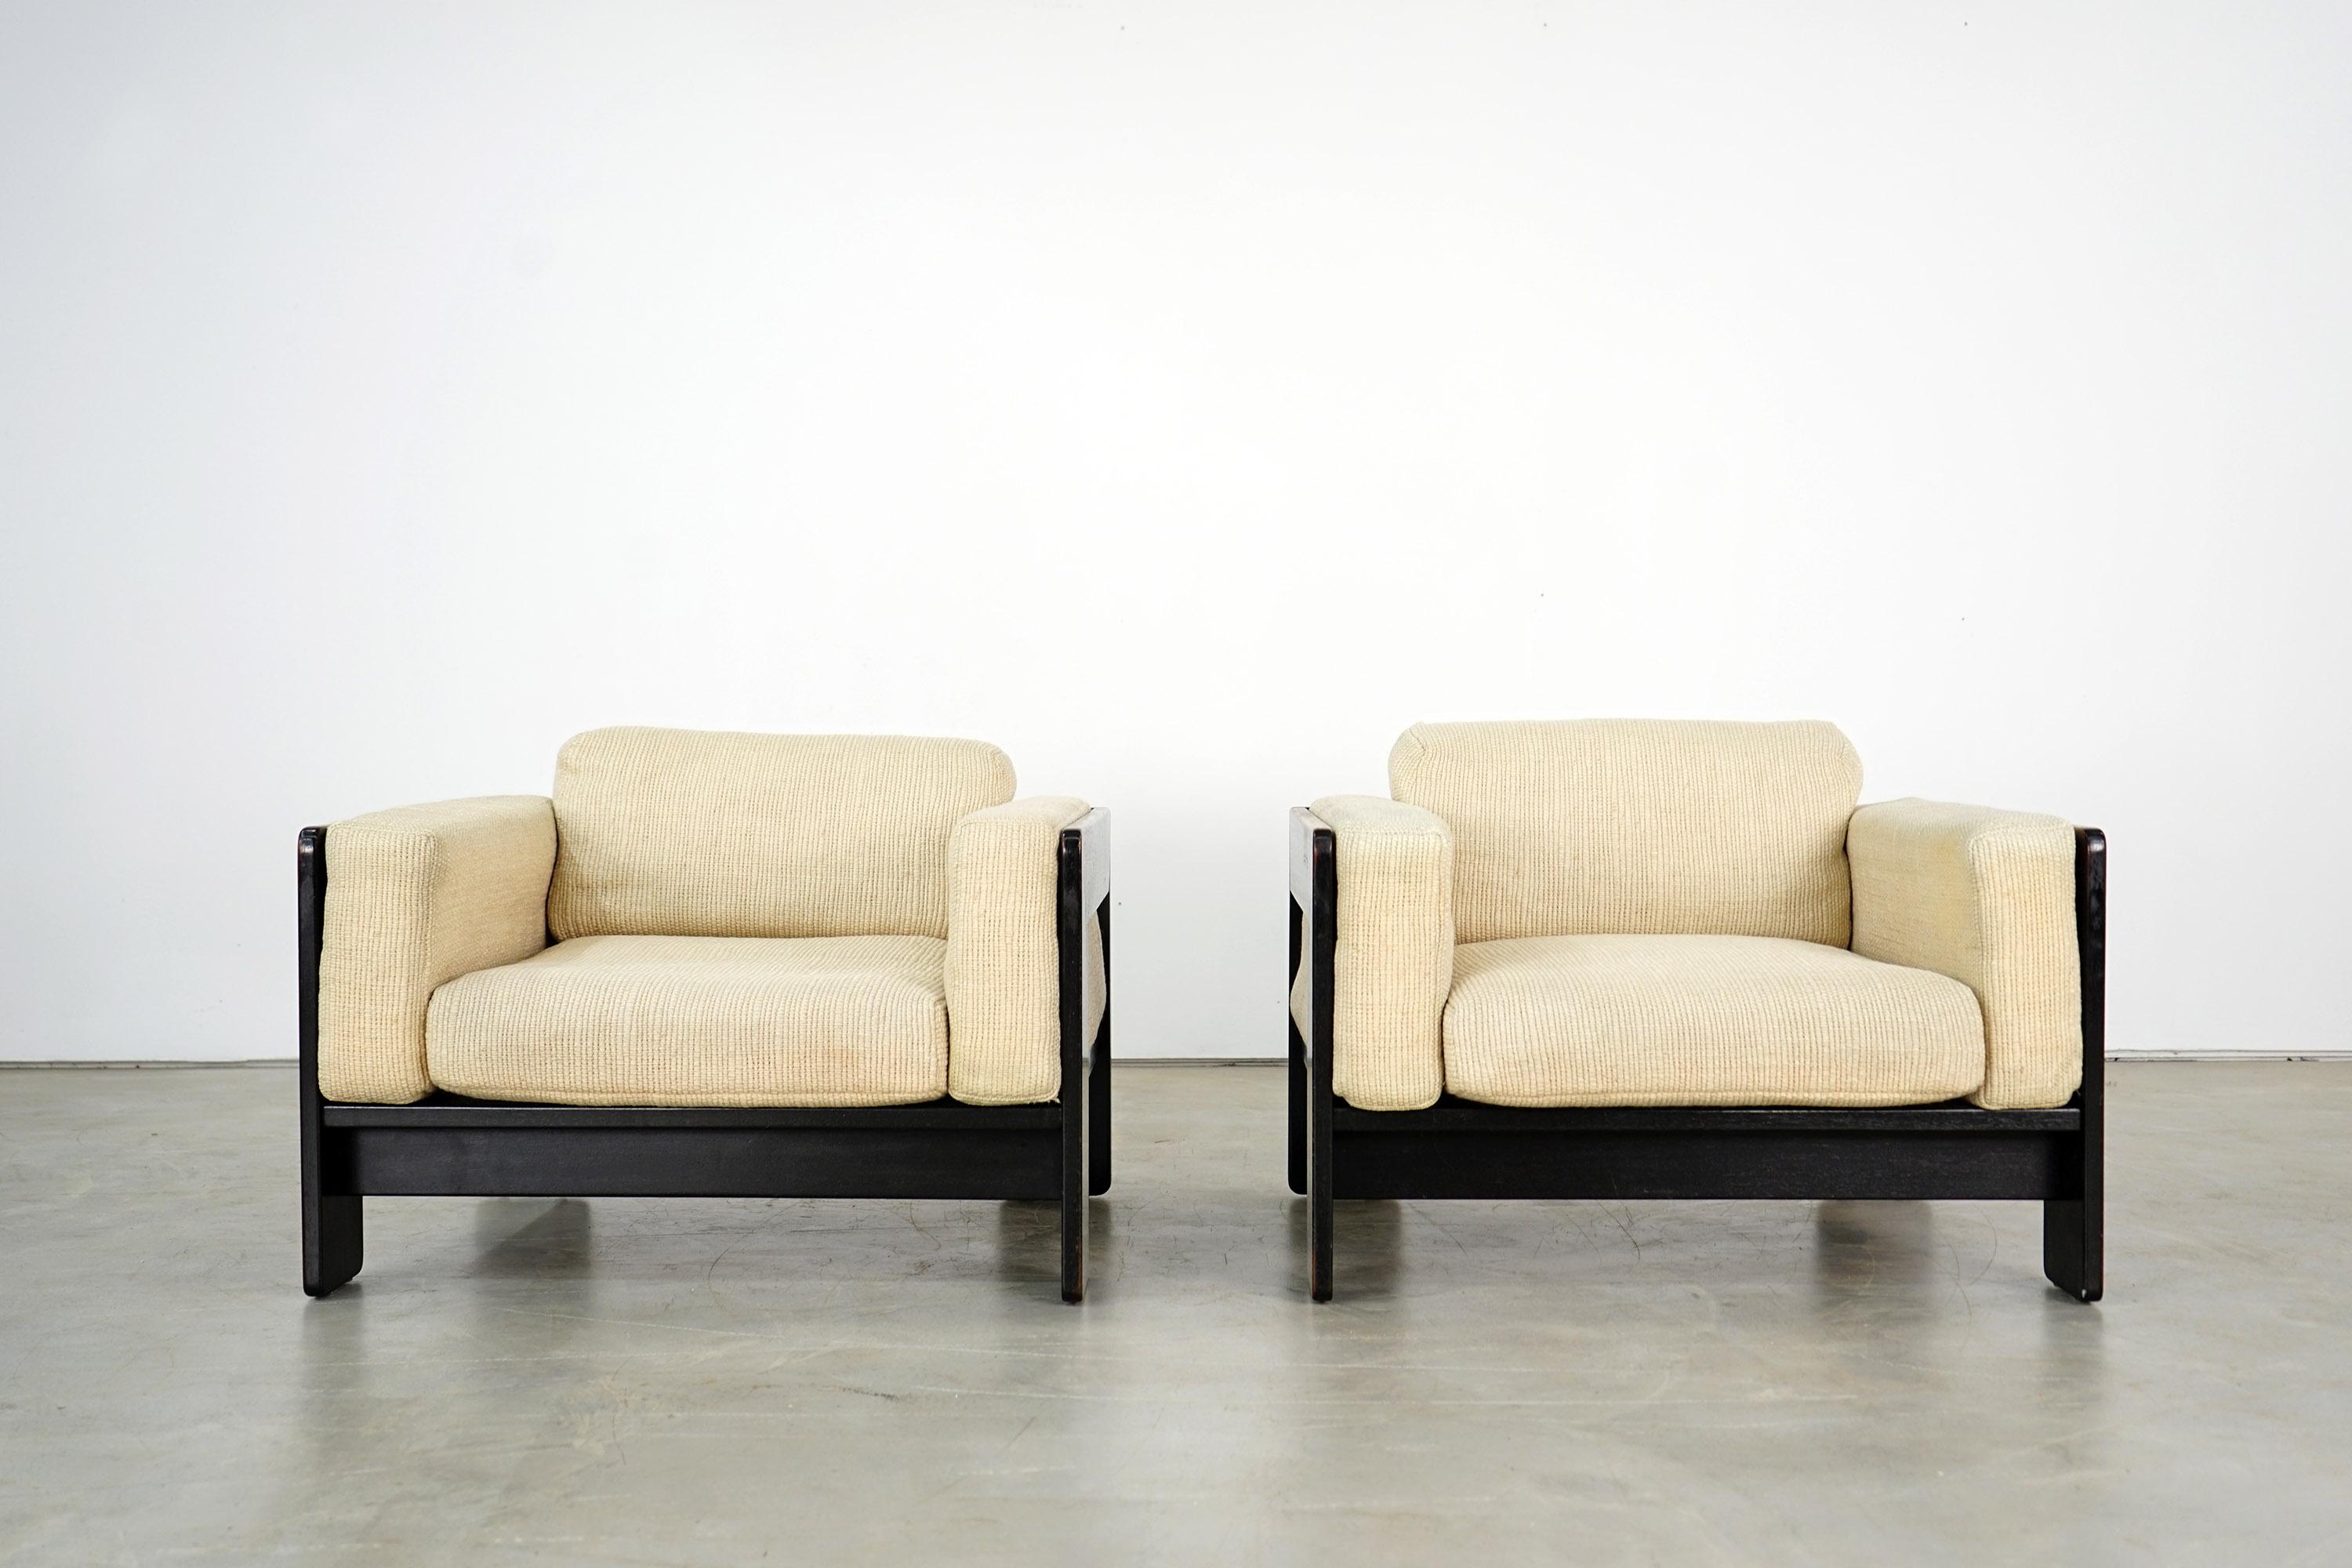 This set consists of two armchairs from the Bastiano series by Afra and Tobia Scarpa. The armchairs have black ebonized oak frames and original sand-colored pillowcases. The upholstery of the pieces has been renewed. Accordingly, they are in an